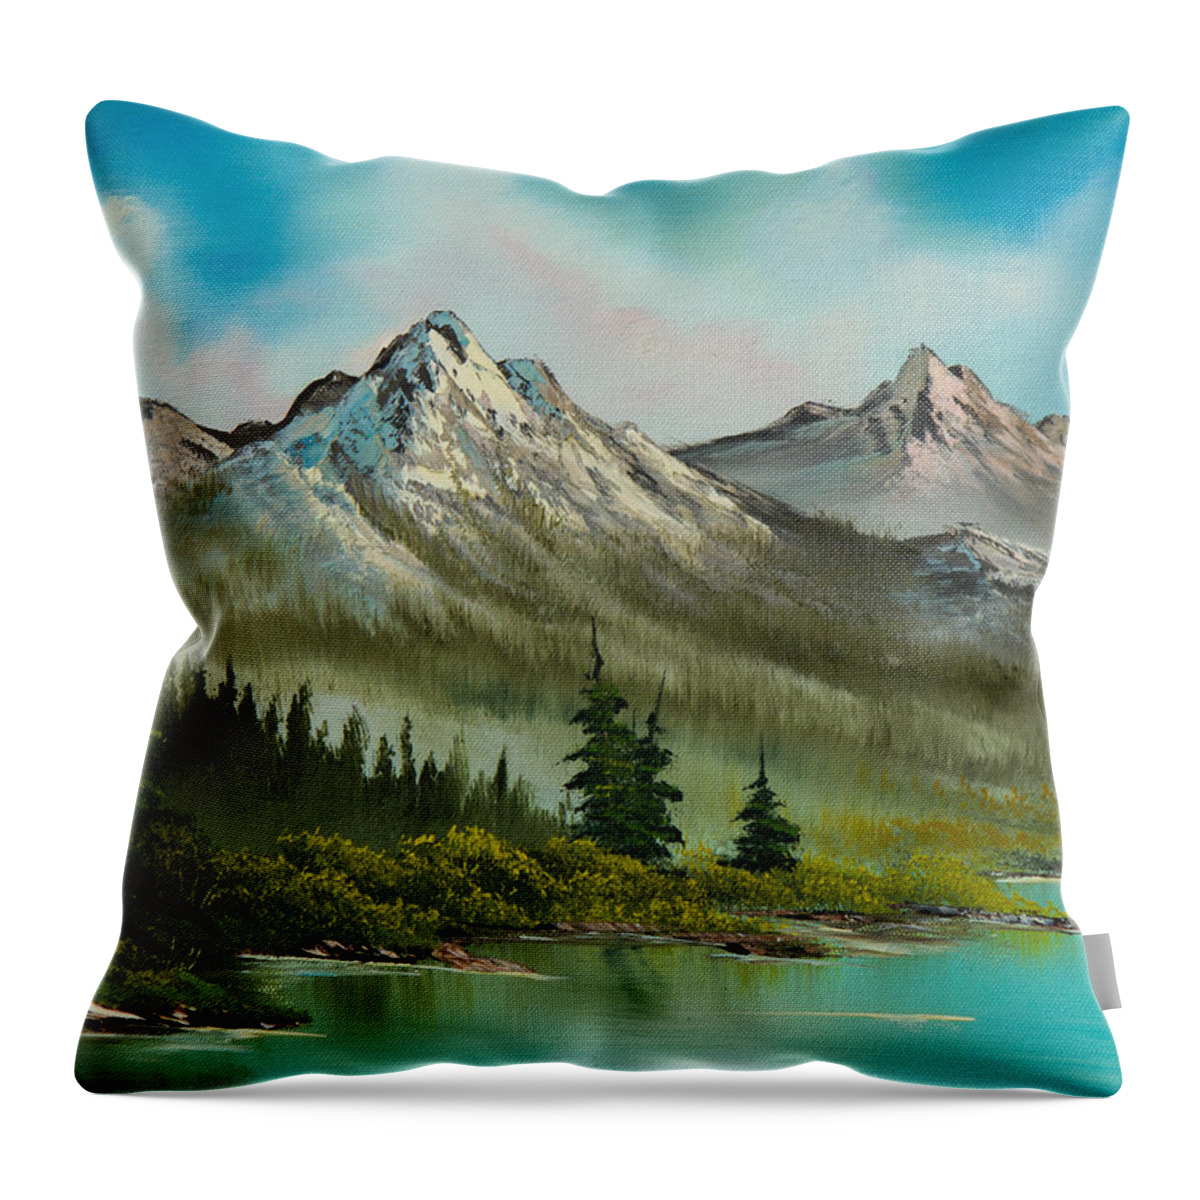 Landscape Throw Pillow featuring the painting Peaceful Pines by Chris Steele